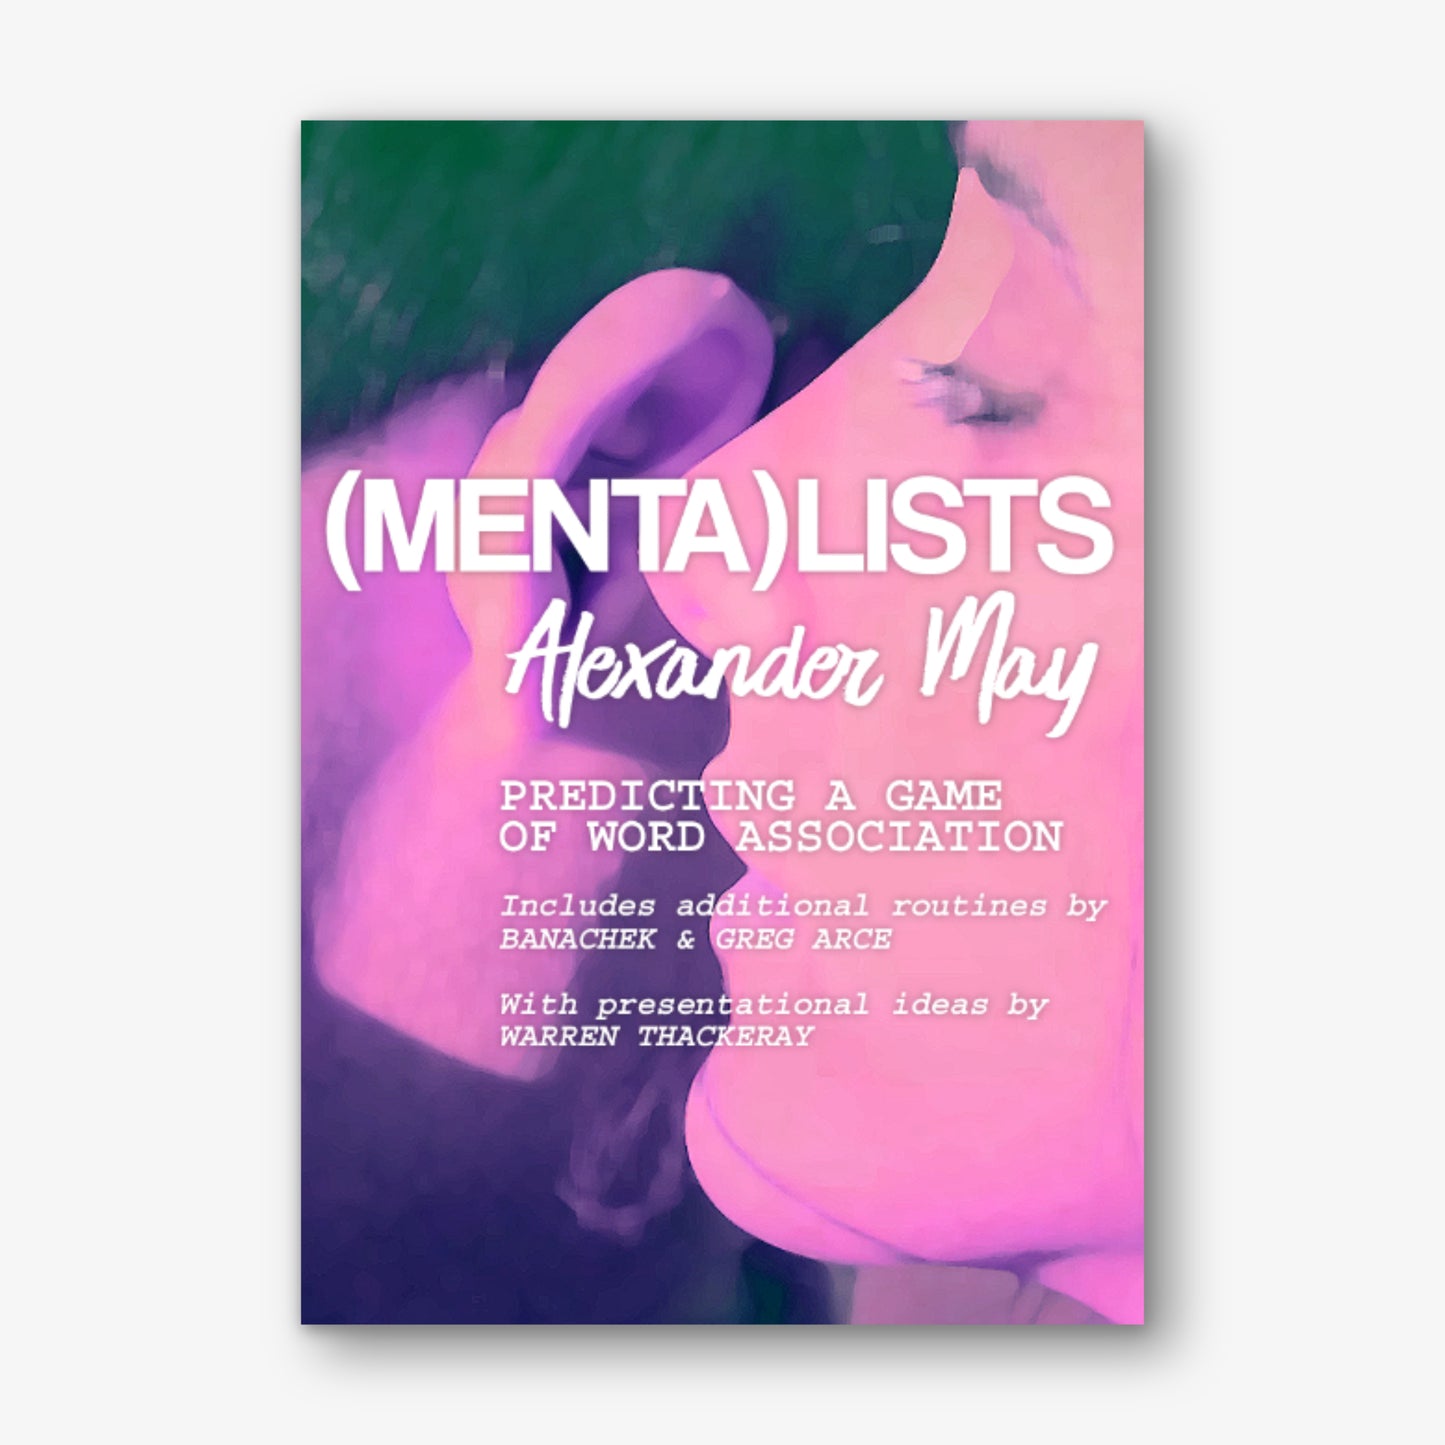 (Menta)Lists by Alexander May